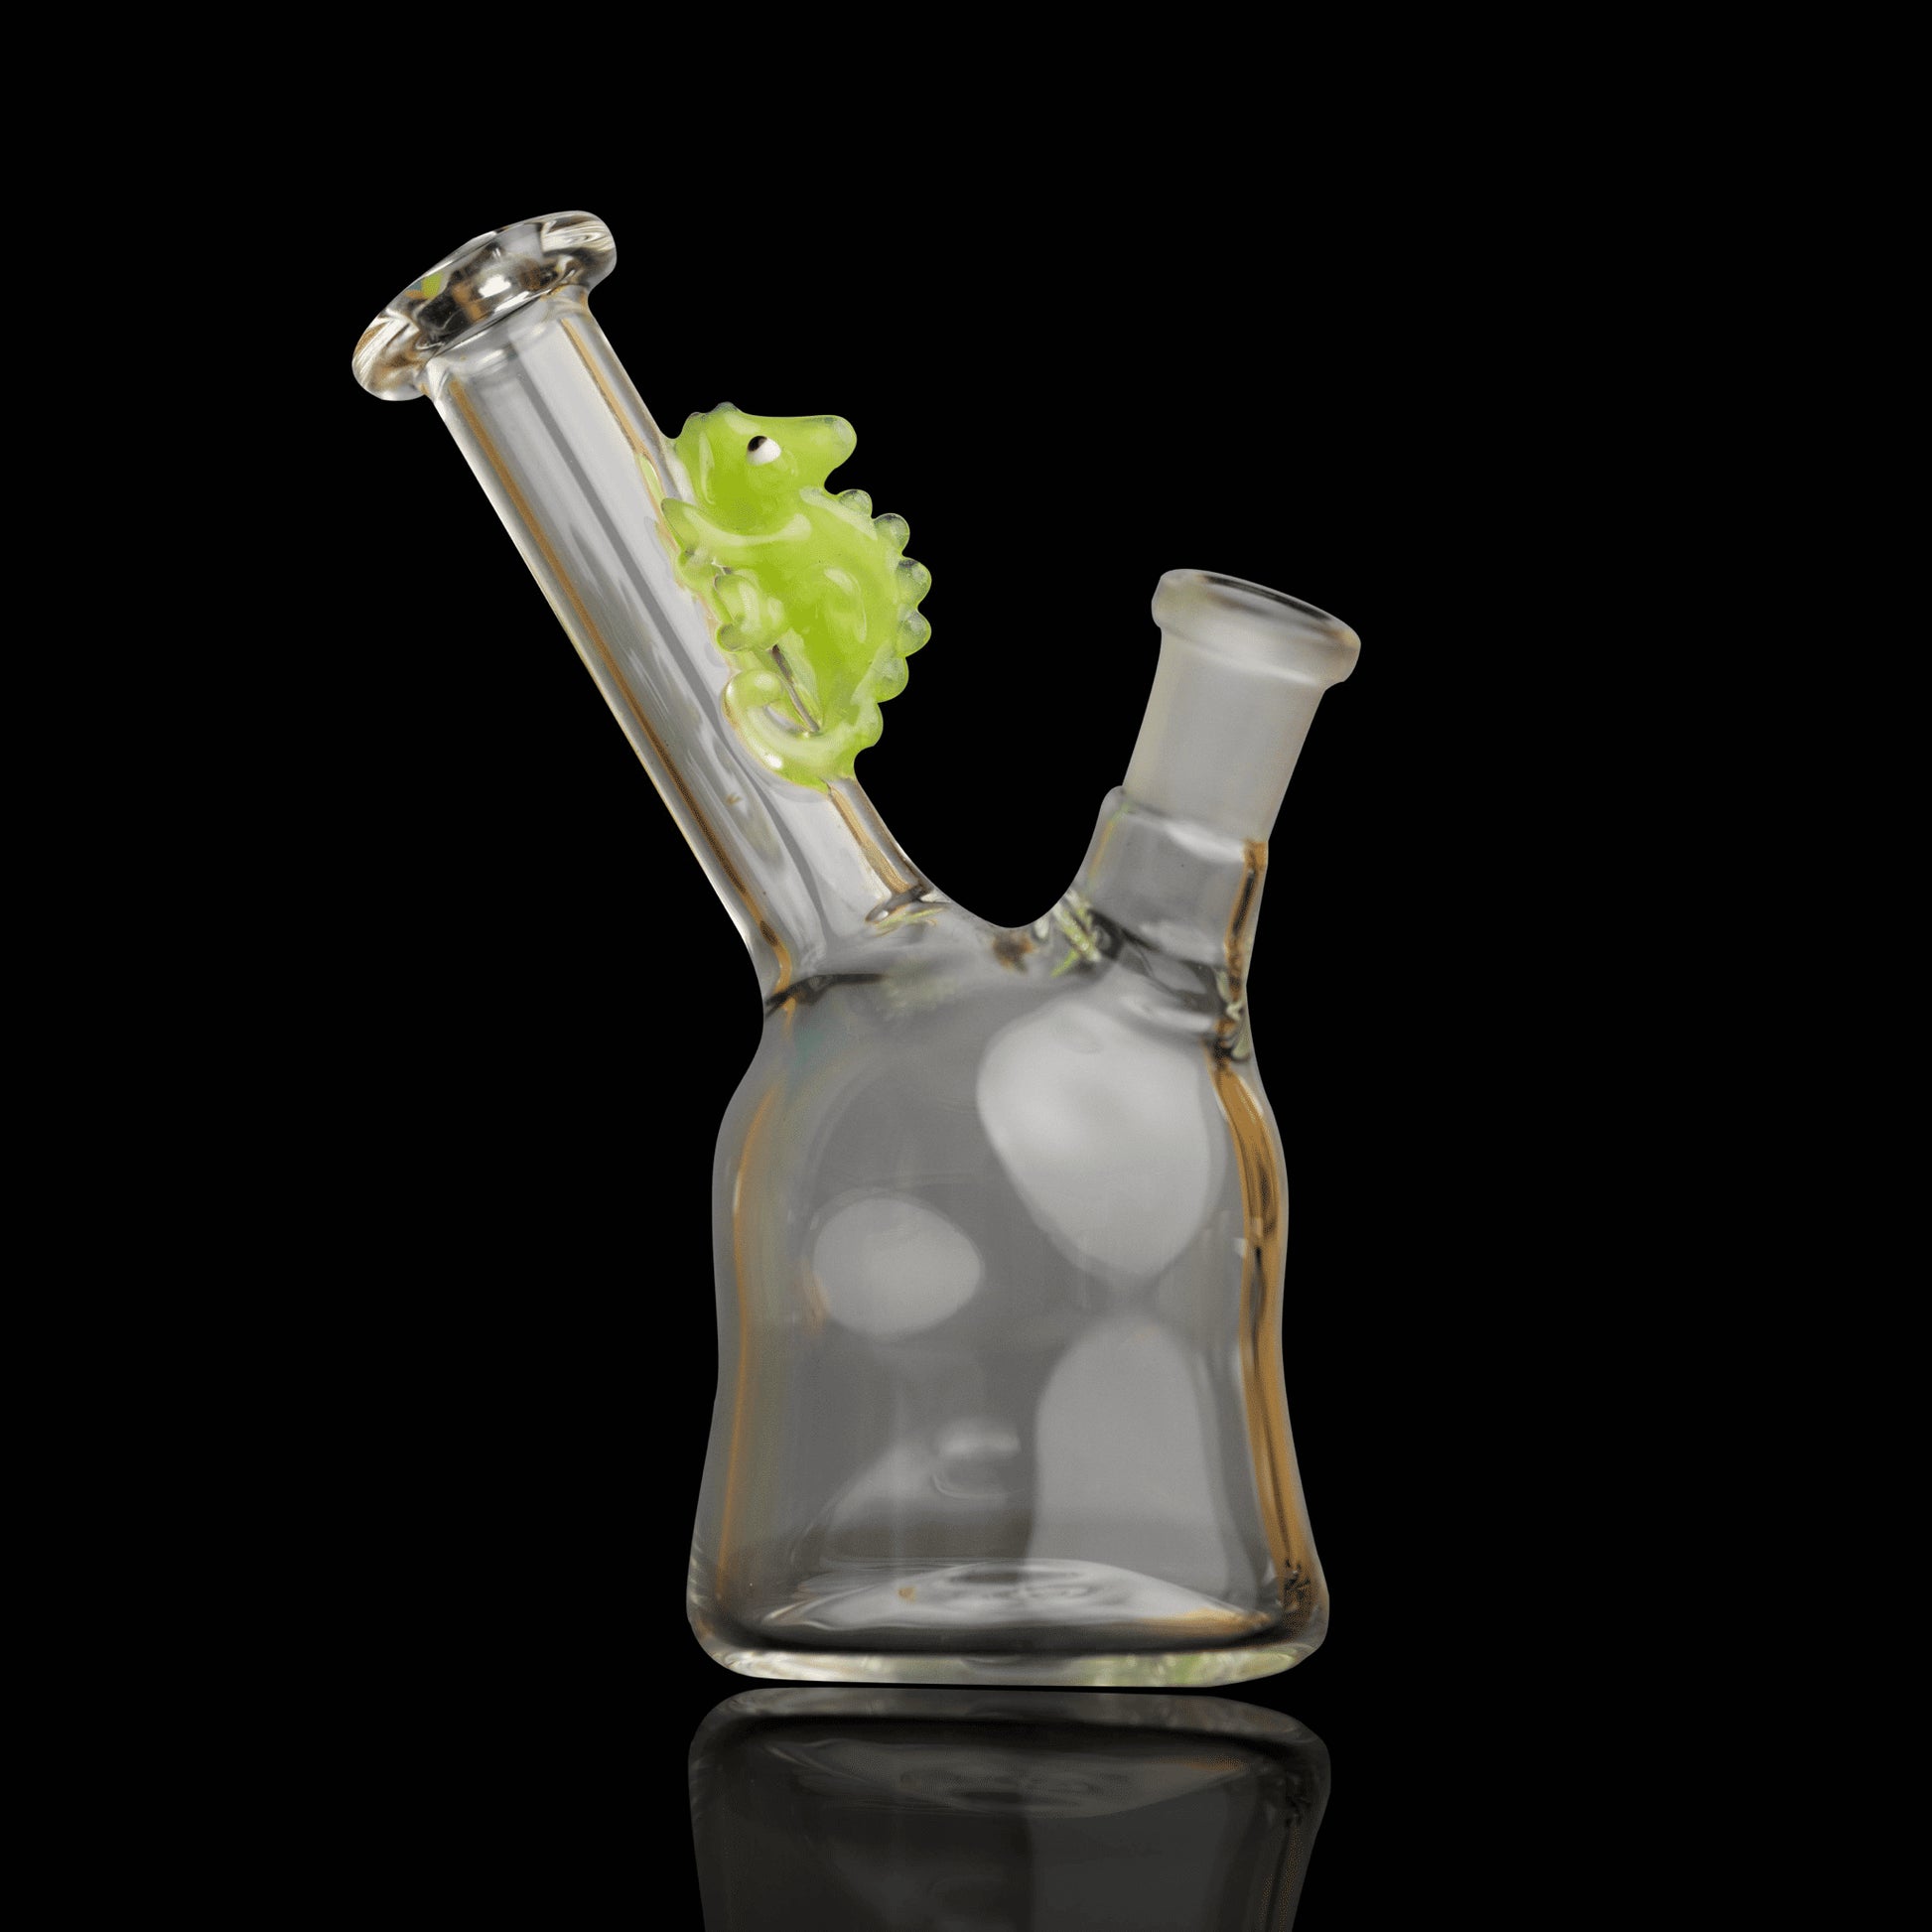 innovative design of the Clear Rig w/ Green Chameleon (H) by Willy That Glass Guy